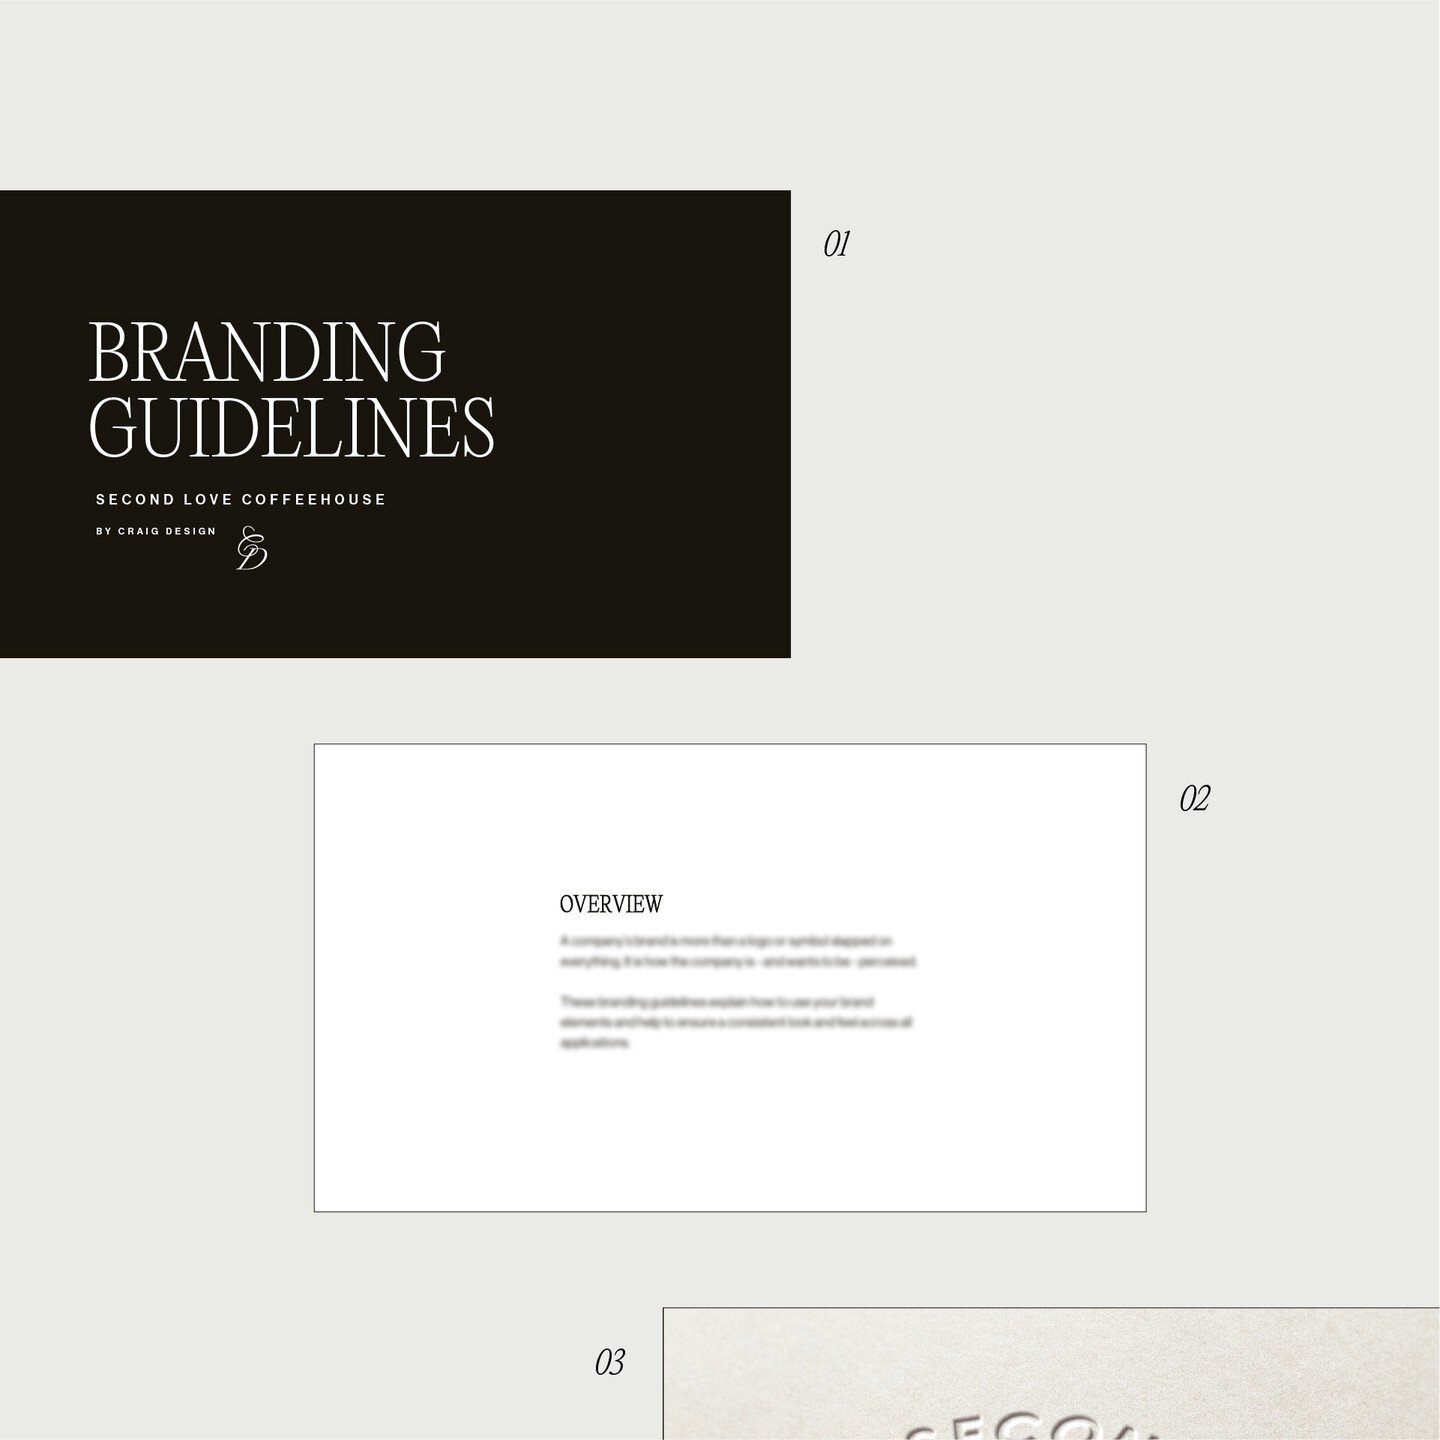 all branding suites come with a digital 'branding guide' document, detailing out the specifics of your brand, your message, your look, and how to use it properly. 🌟 #branding #brandingguide #design #aesthetic